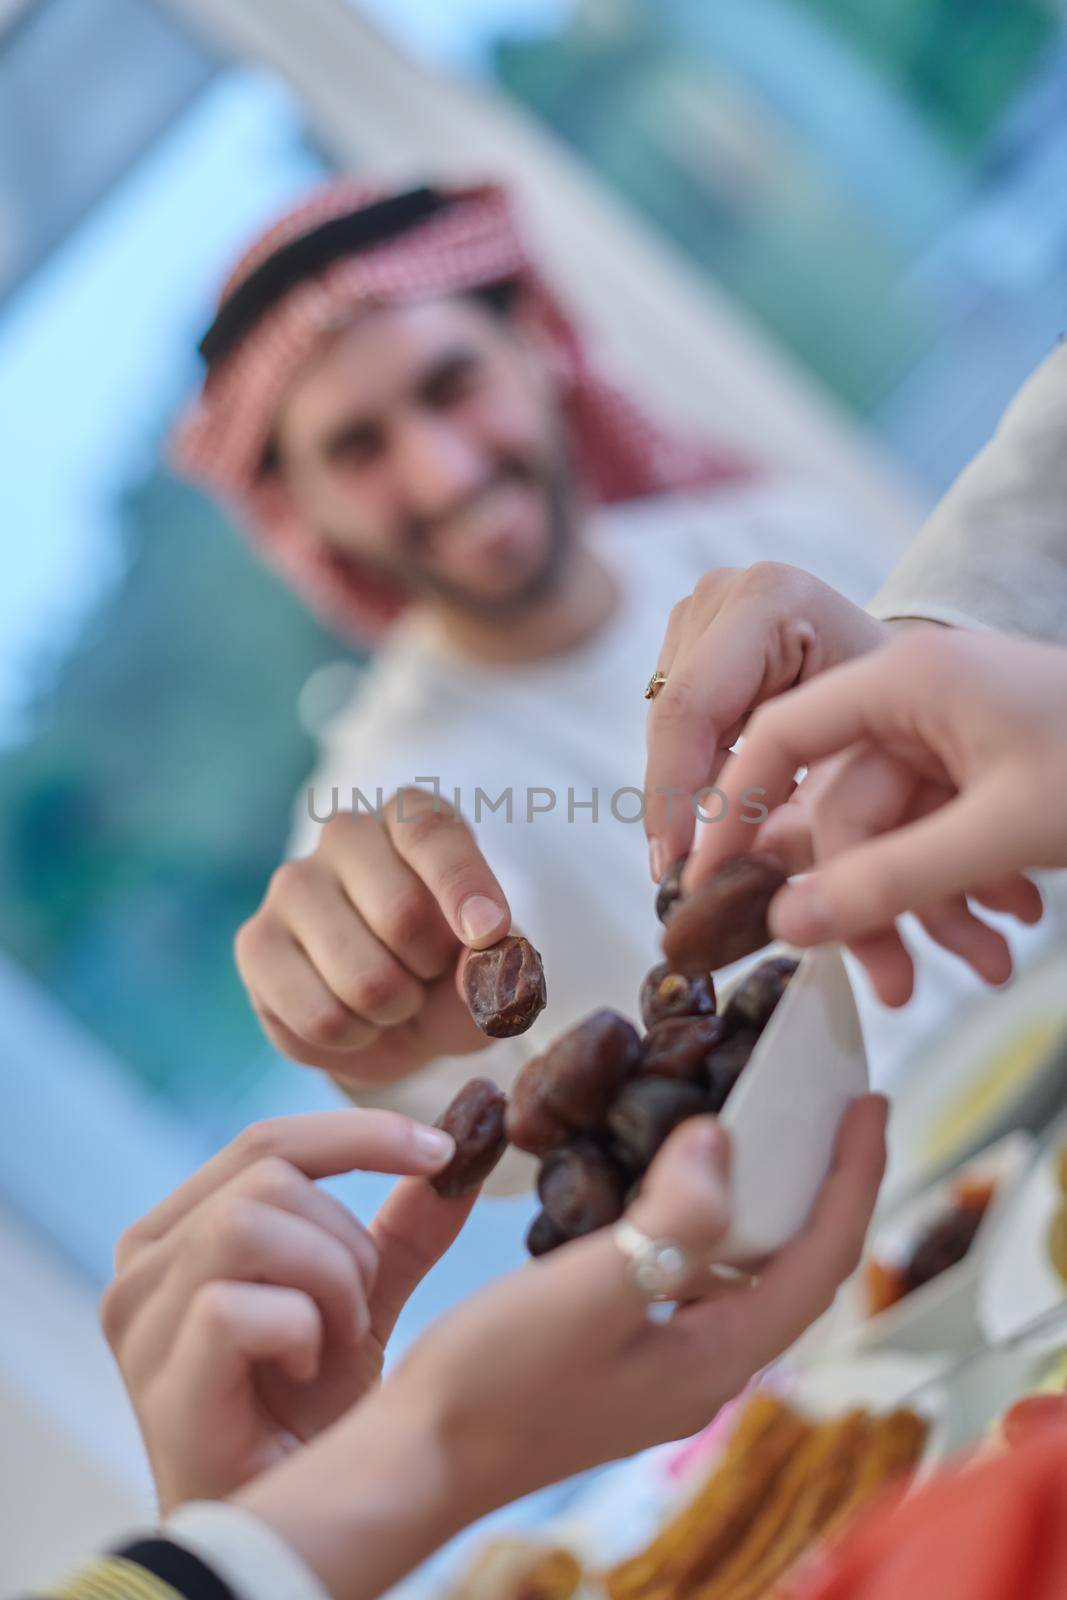 Muslim family having iftar together during Ramadan. Arabian people gathering for traditional dinner during fasting month. Dates sharing to break fasting